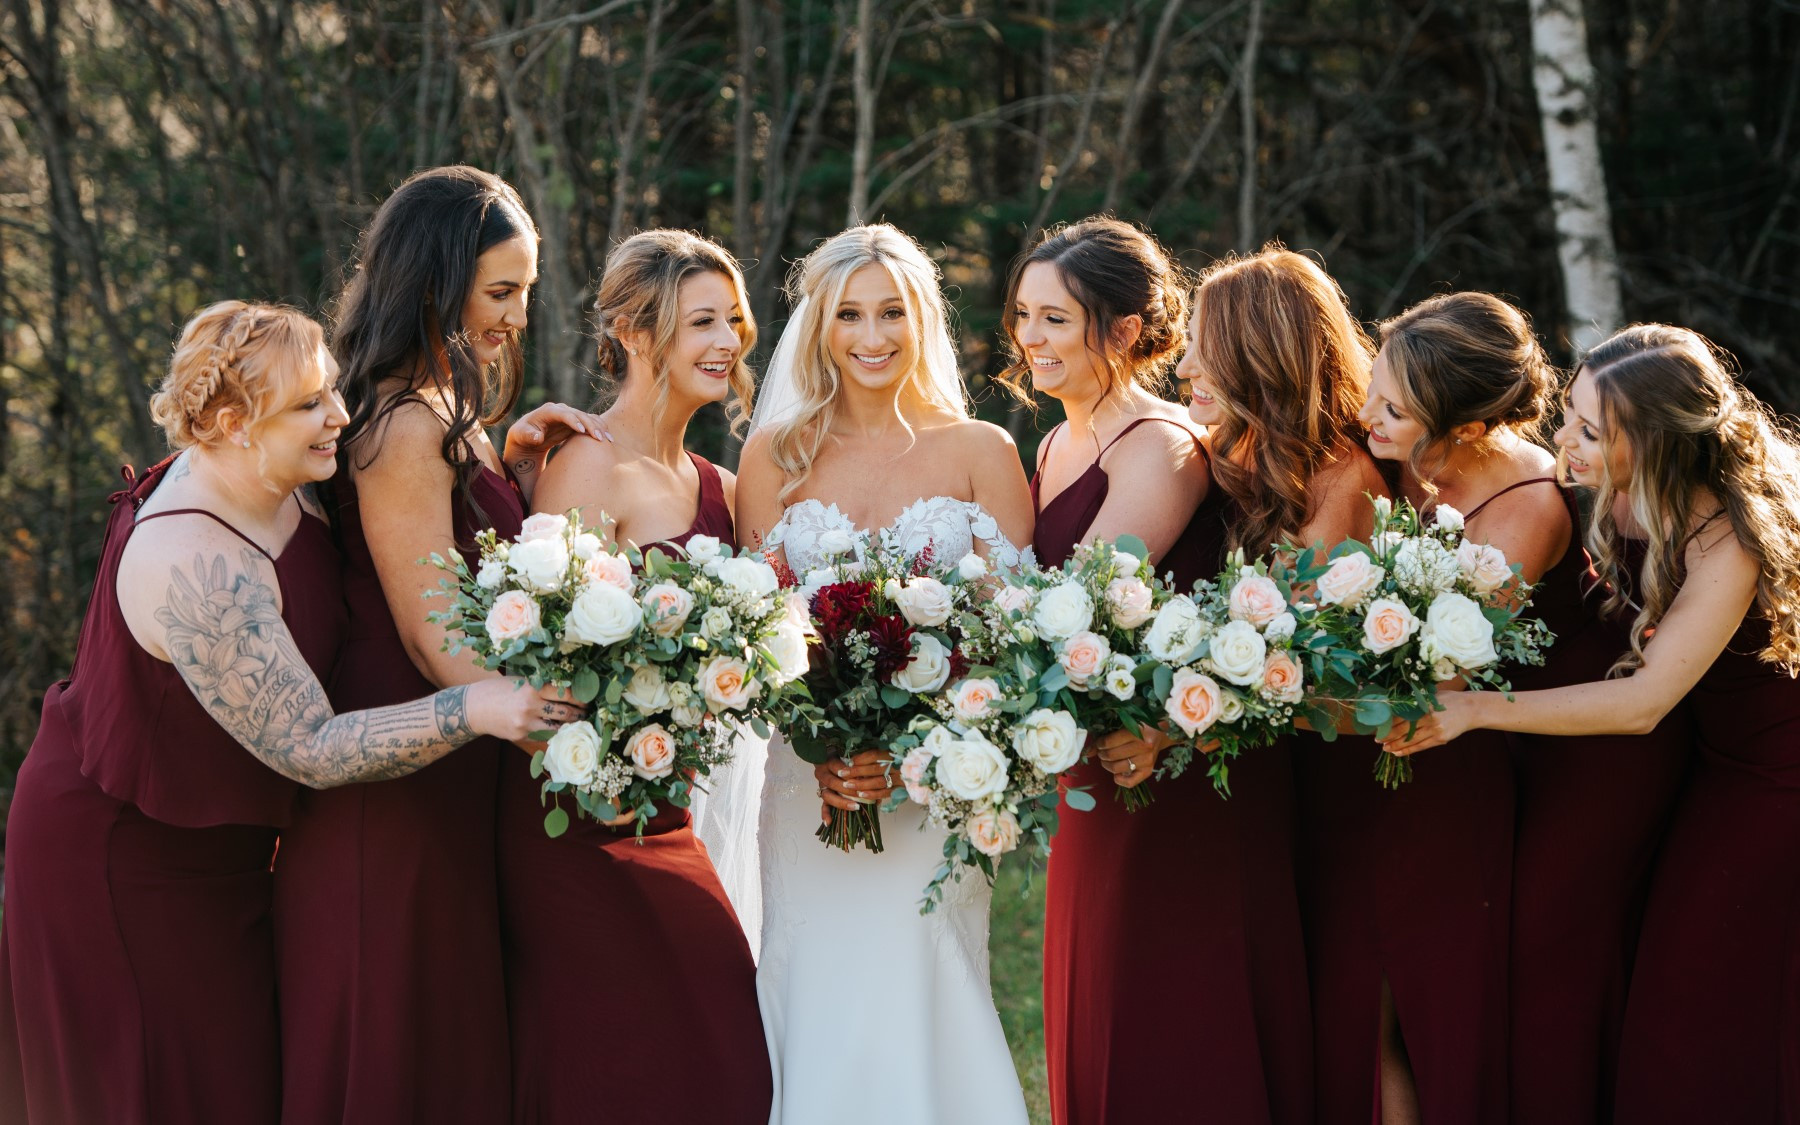 bride and seven bridesmaids in red dresses leaning in holding bouquets. Bridal bouquet features red flowers while bridesmaid bouquets only have pink and white flora.